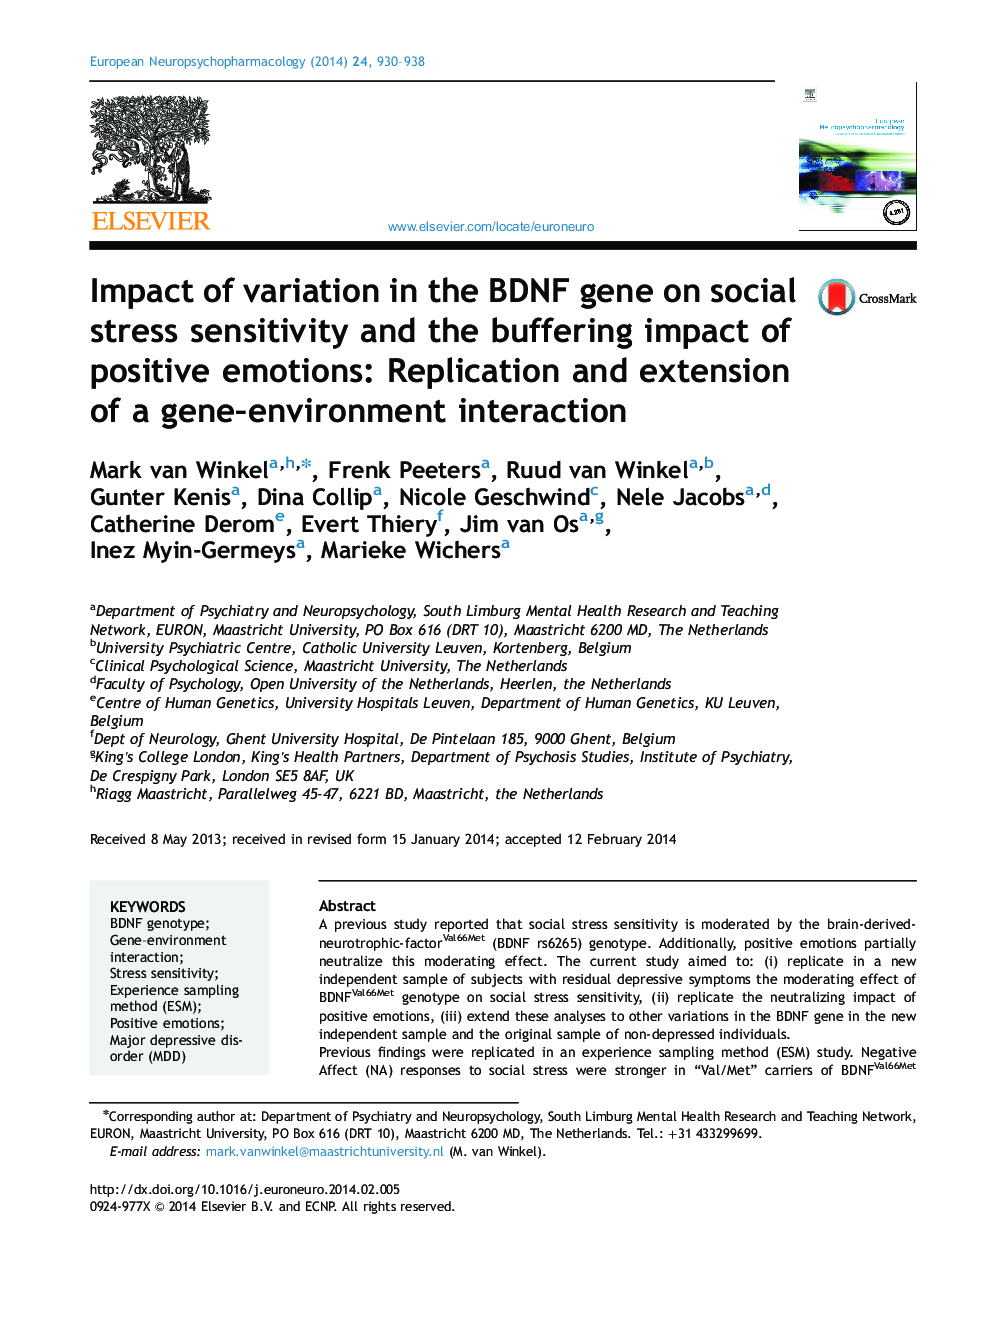 Impact of variation in the BDNF gene on social stress sensitivity and the buffering impact of positive emotions: Replication and extension of a gene-environment interaction